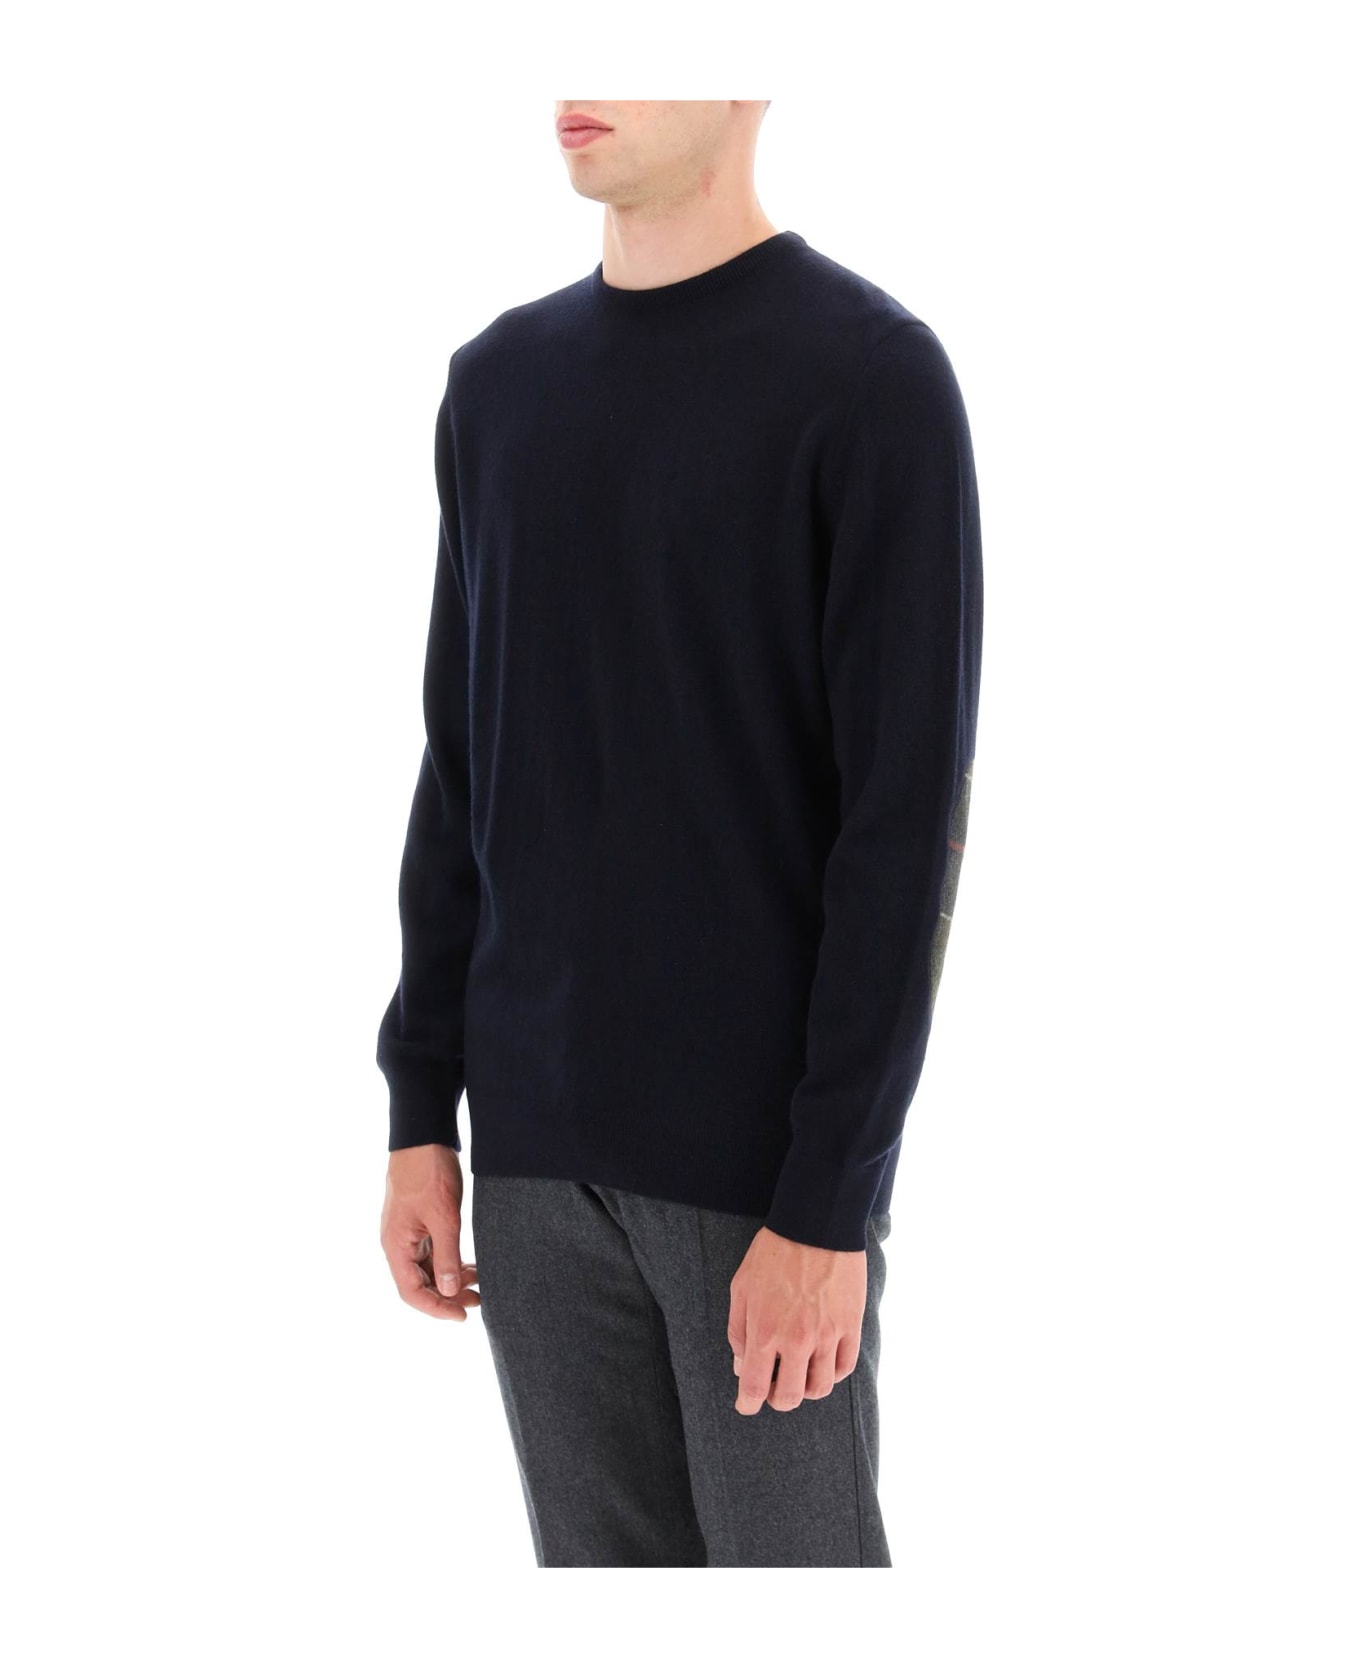 Barbour 'harrow' Wool And Cashmere Sweater - DARK NAVY (Blue)